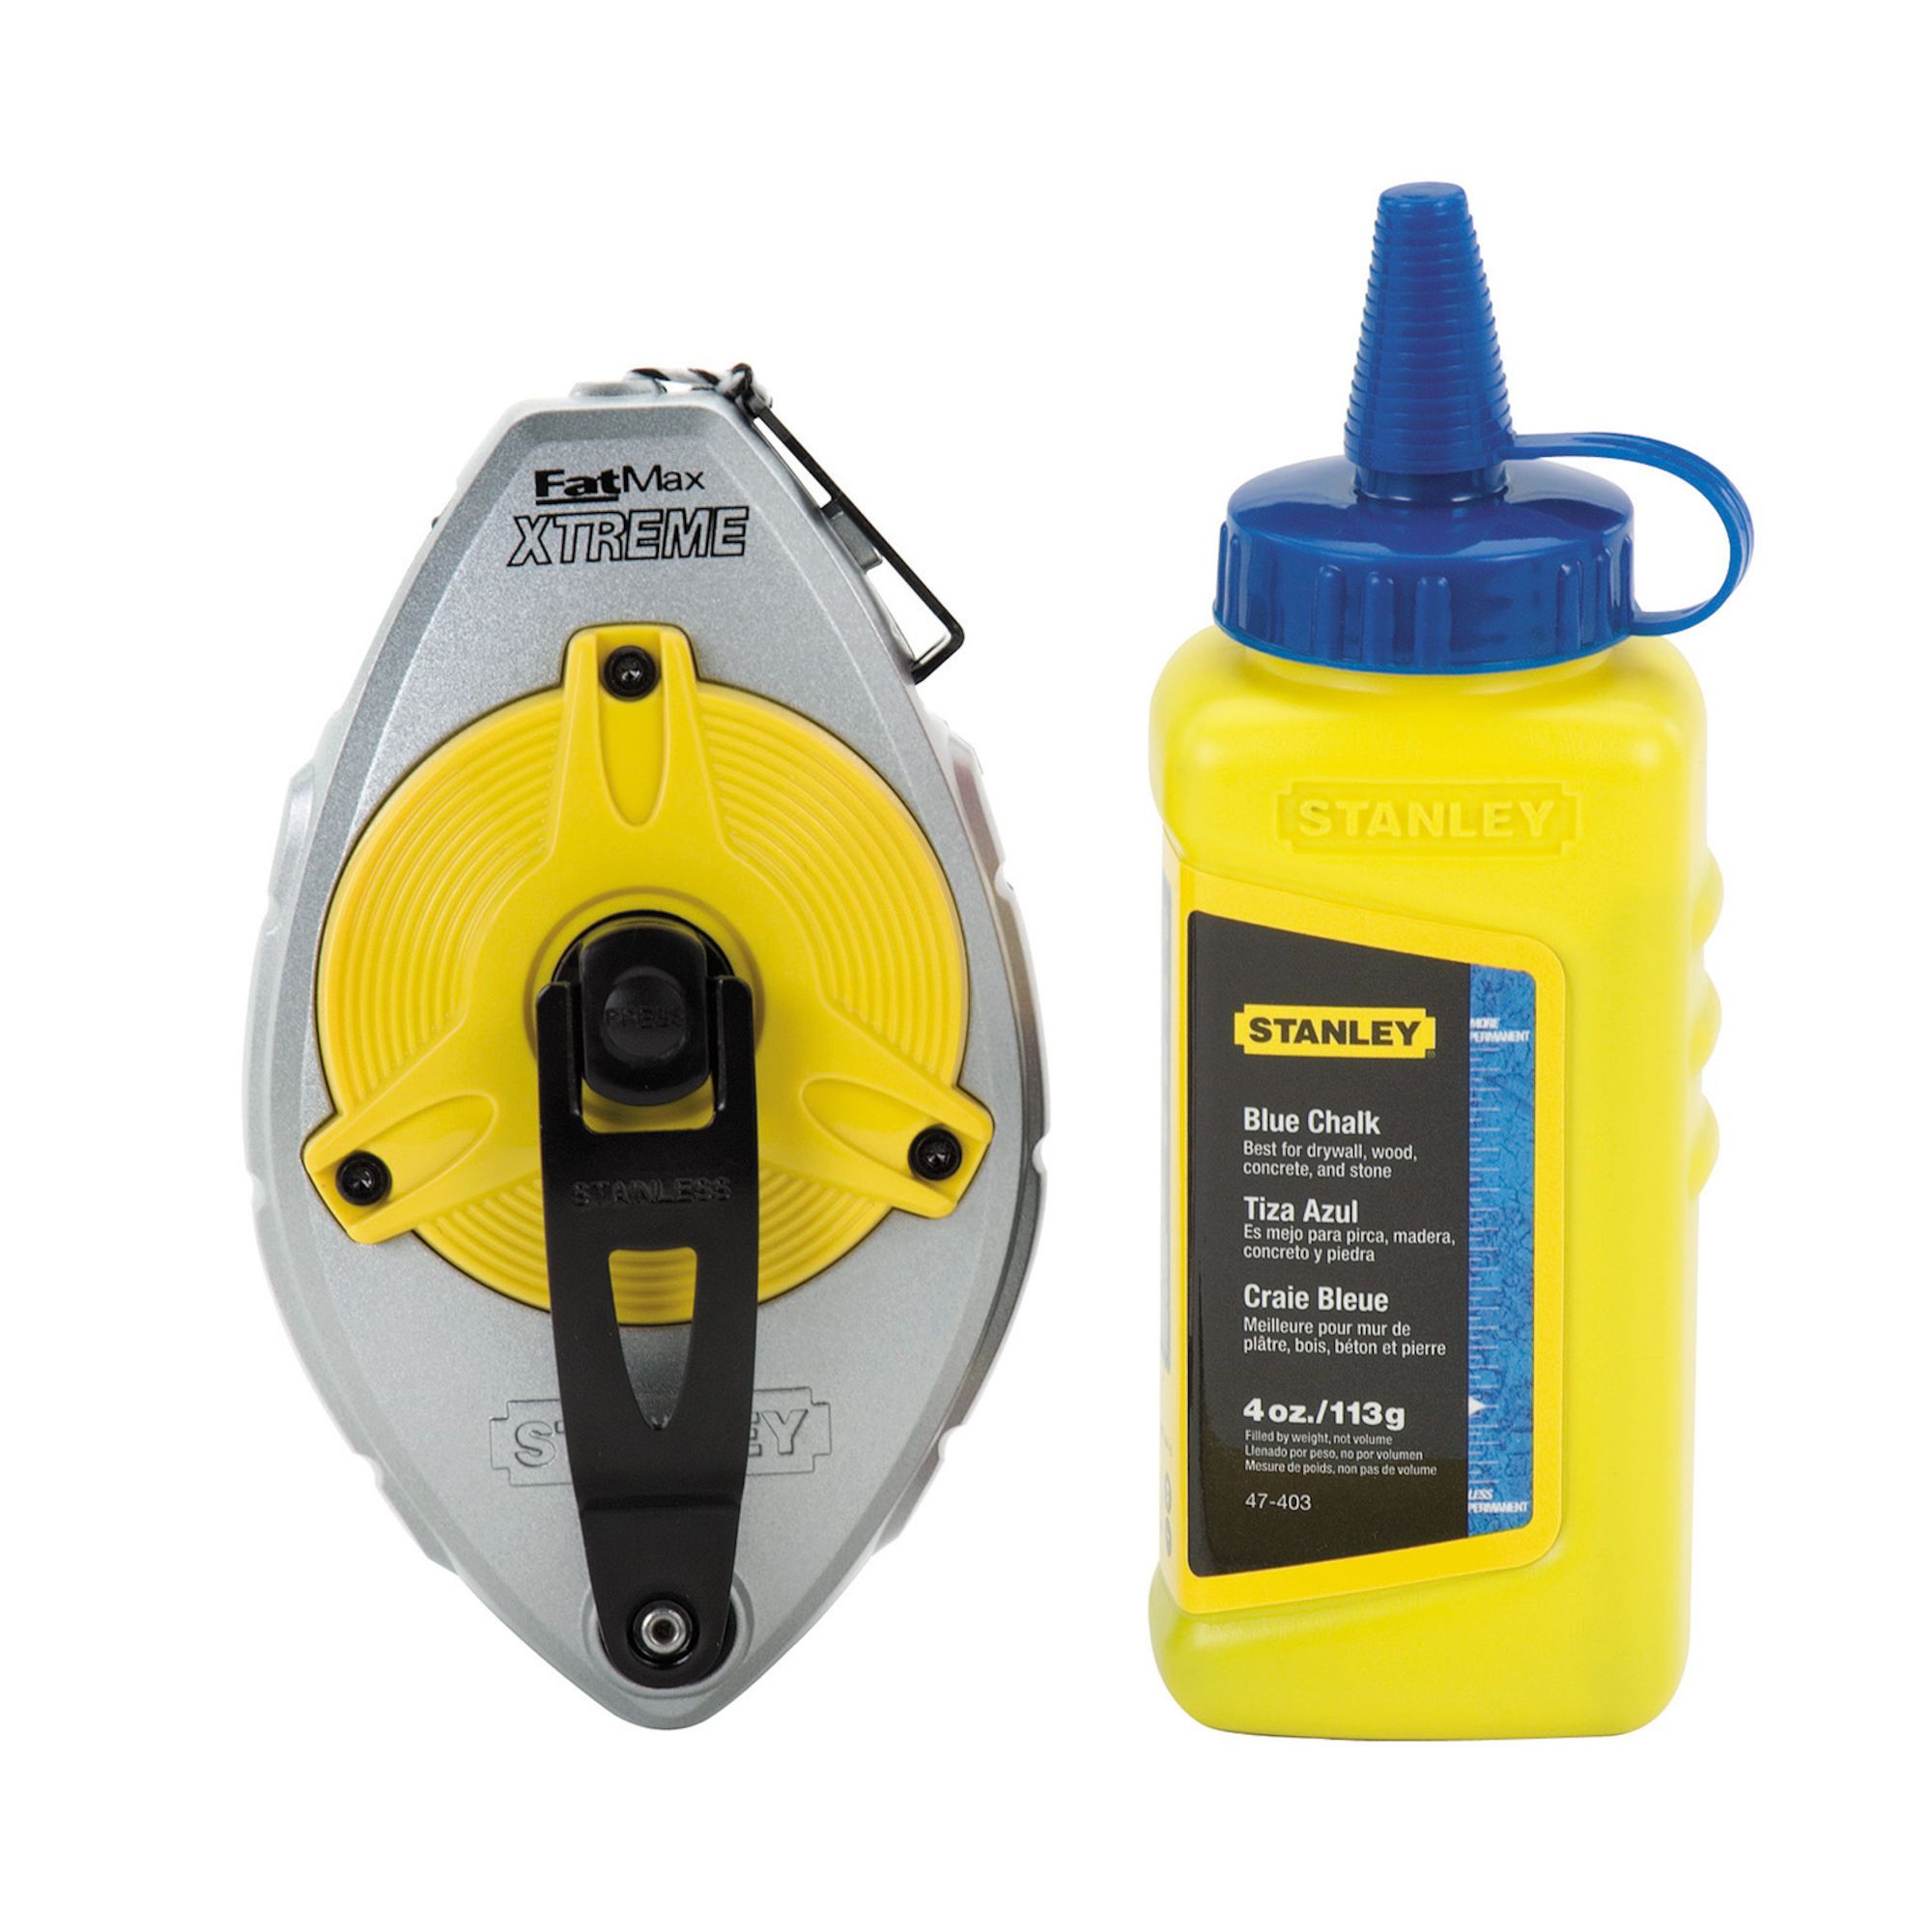 XTREME chalk line set from STANLEY